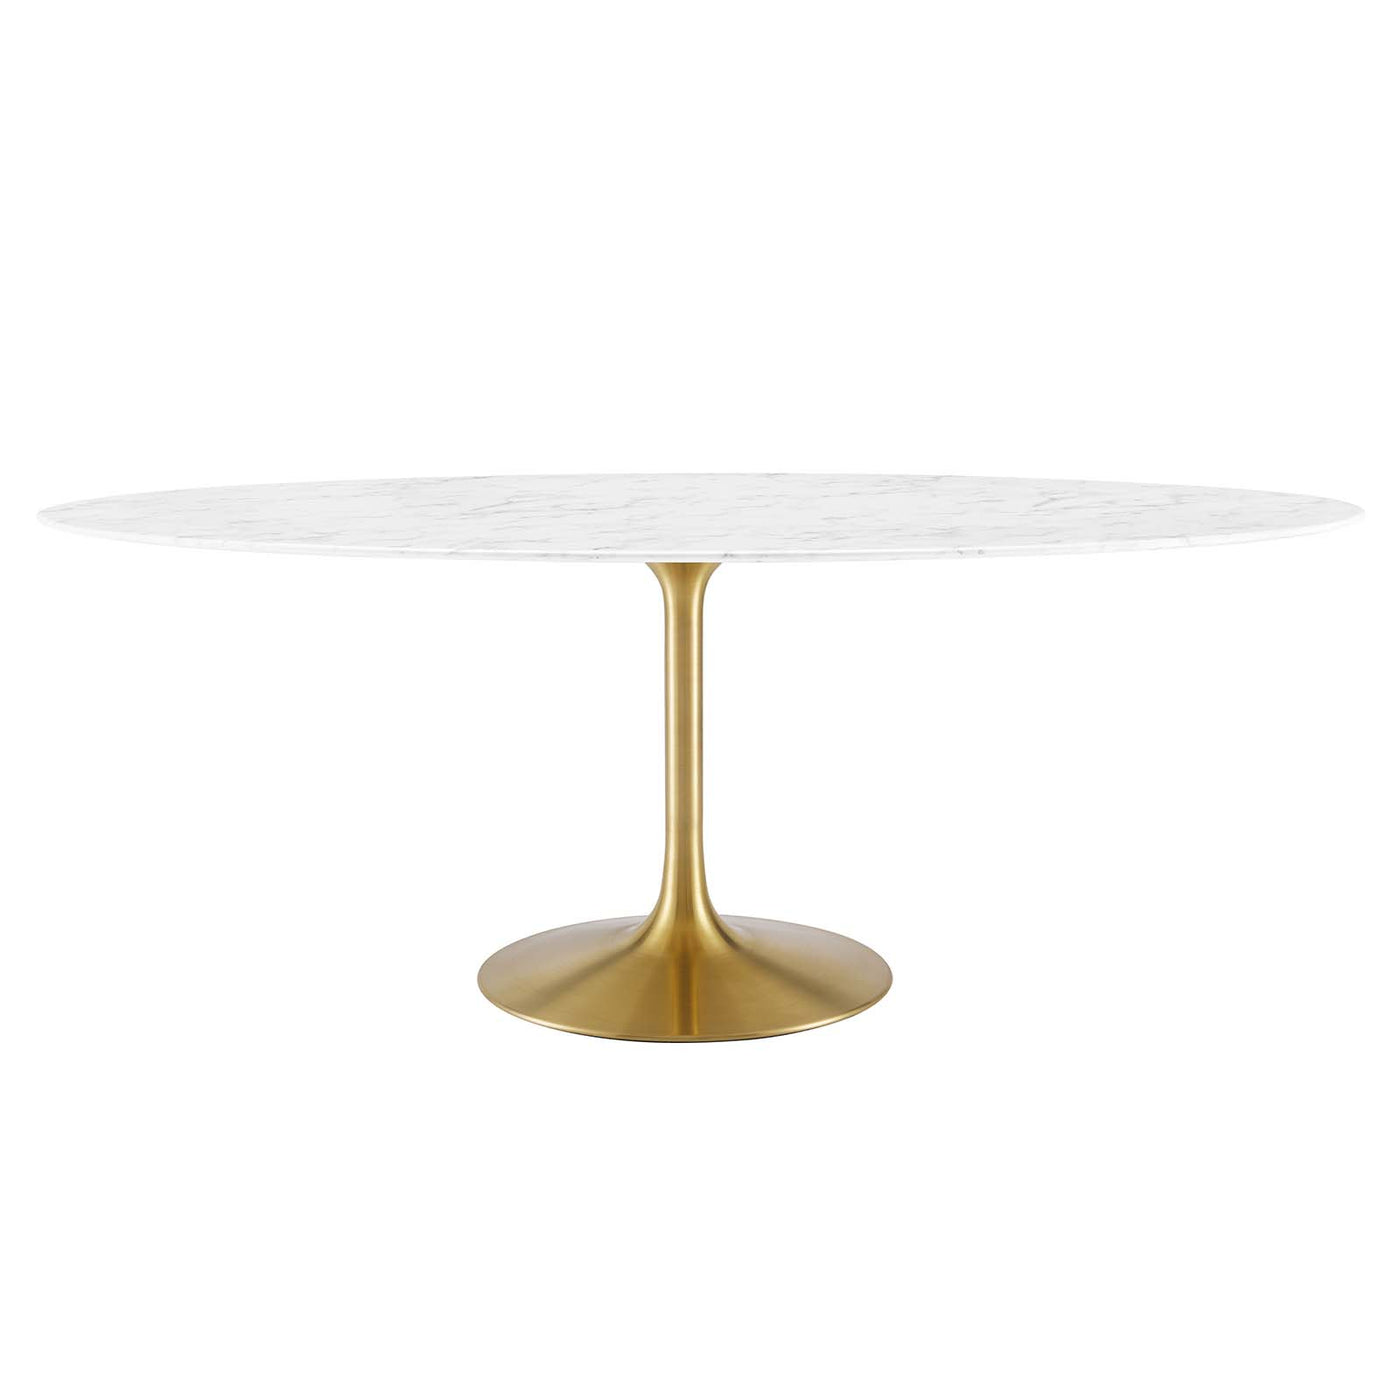 Lippa 78" Oval Artificial Marble Dining Table